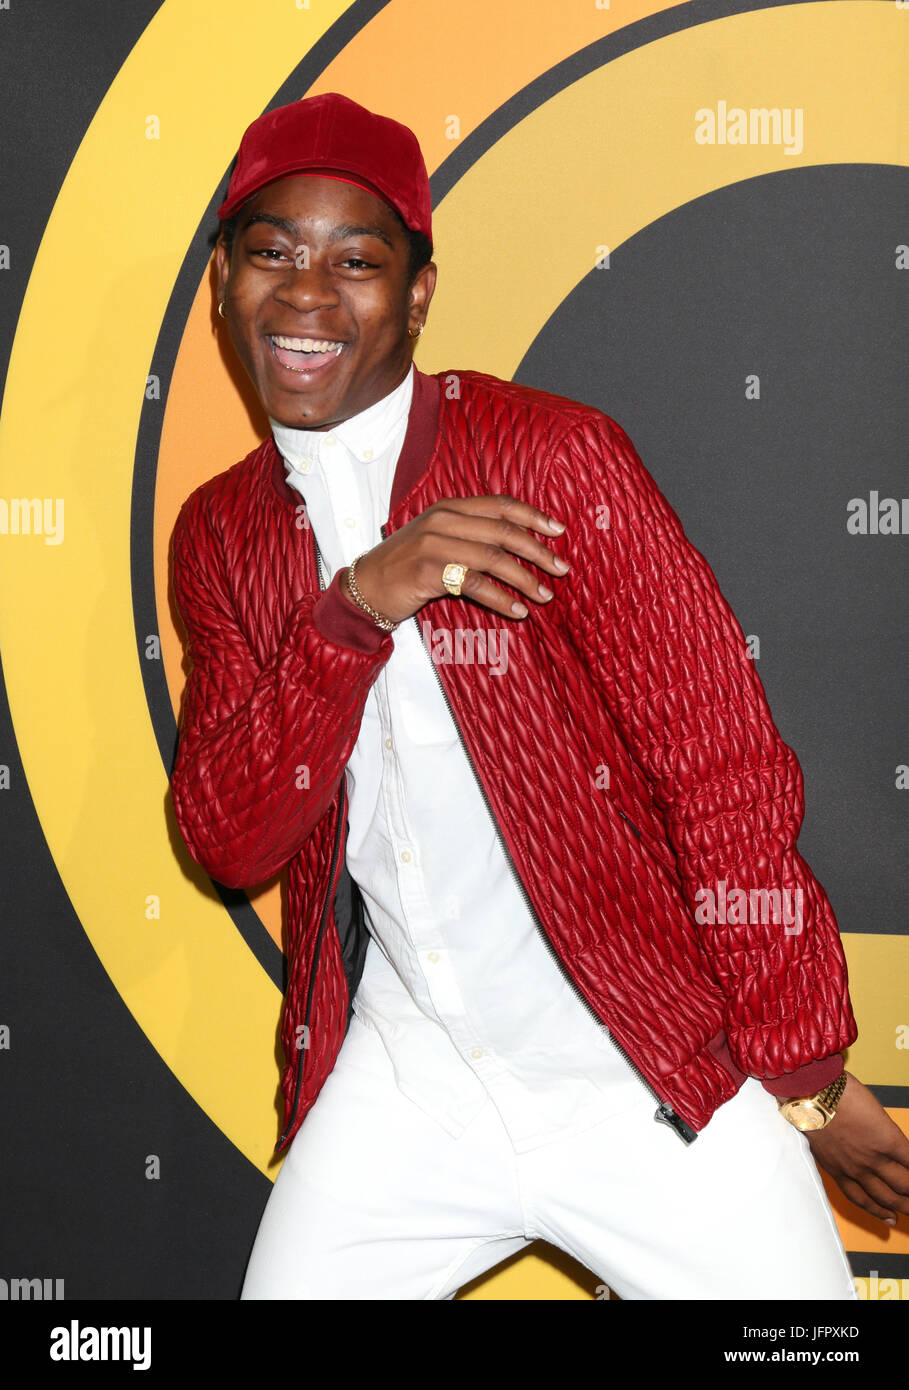 Premiere of Showtime's 'I'm Dying Up Here' at the DGA Theater - Arrivals  Featuring: RJ Cyler Where: Los Angeles, California, United States When: 31 May 2017 Credit: Nicky Nelson/WENN.com Stock Photo